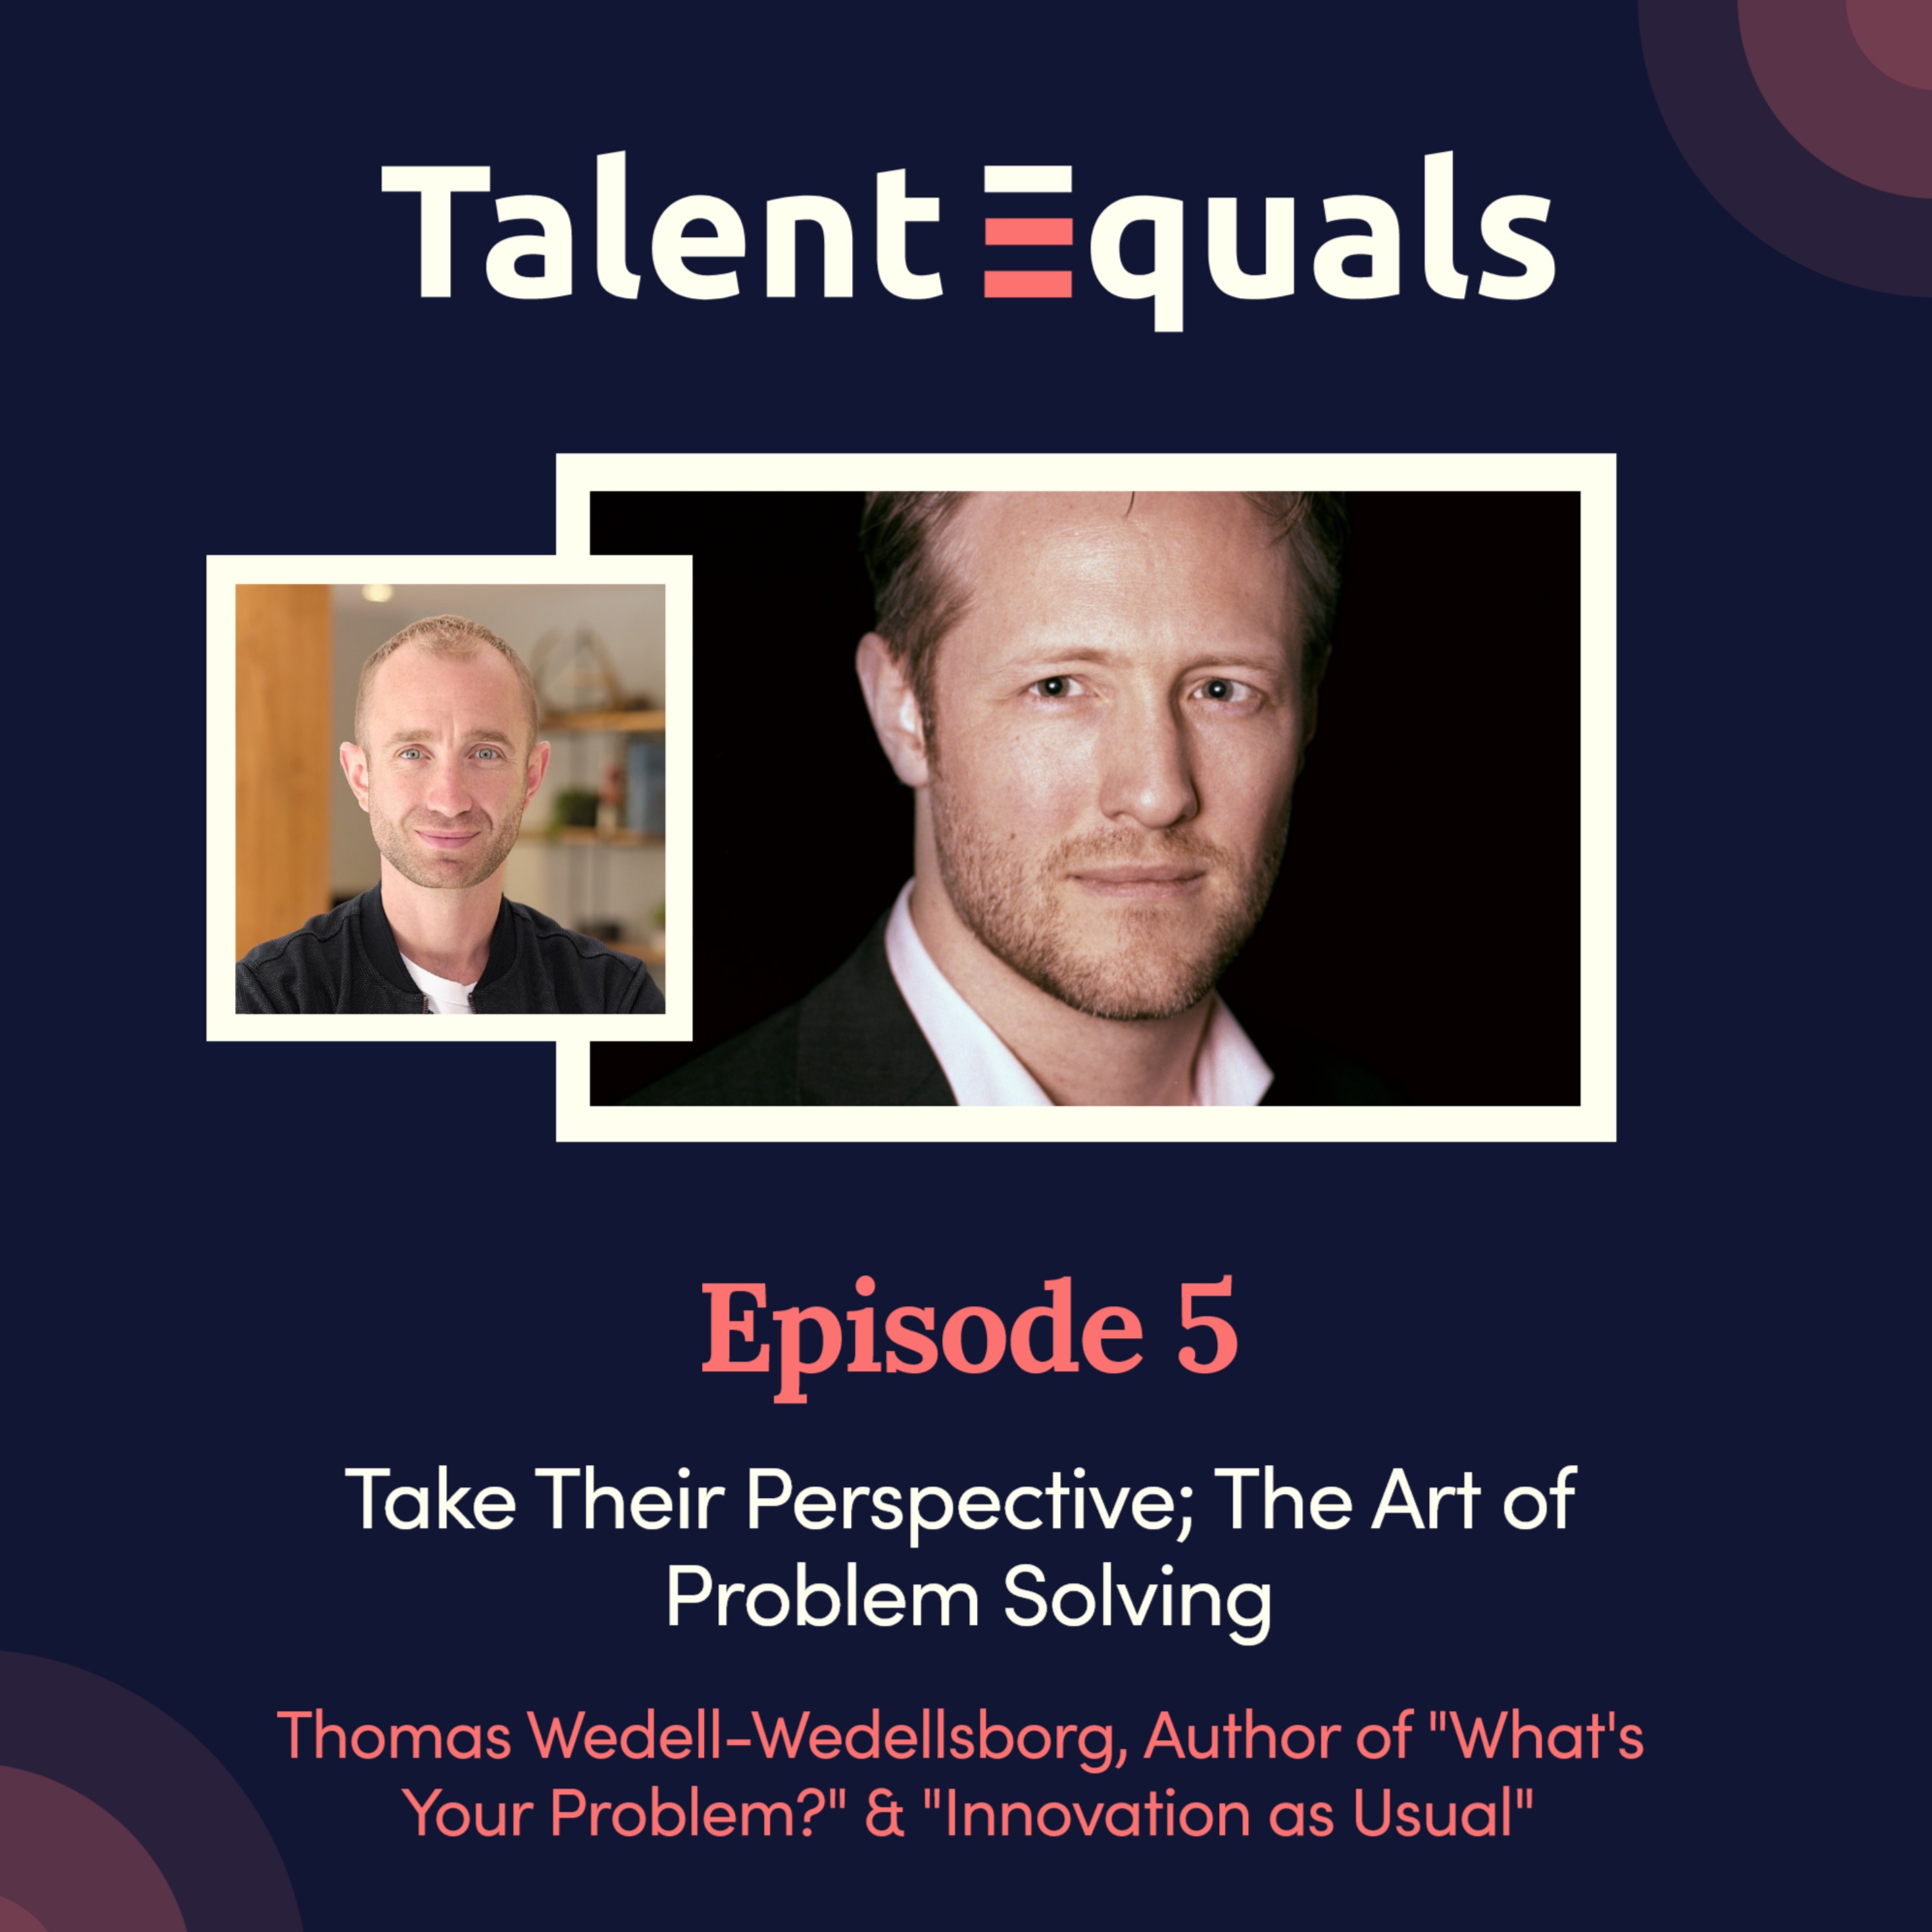 Ep.5. Thomas Wedell-Wedellsborg, Author of "What's Your Problem?" Take Their Perspective; The Art of Problem Solving